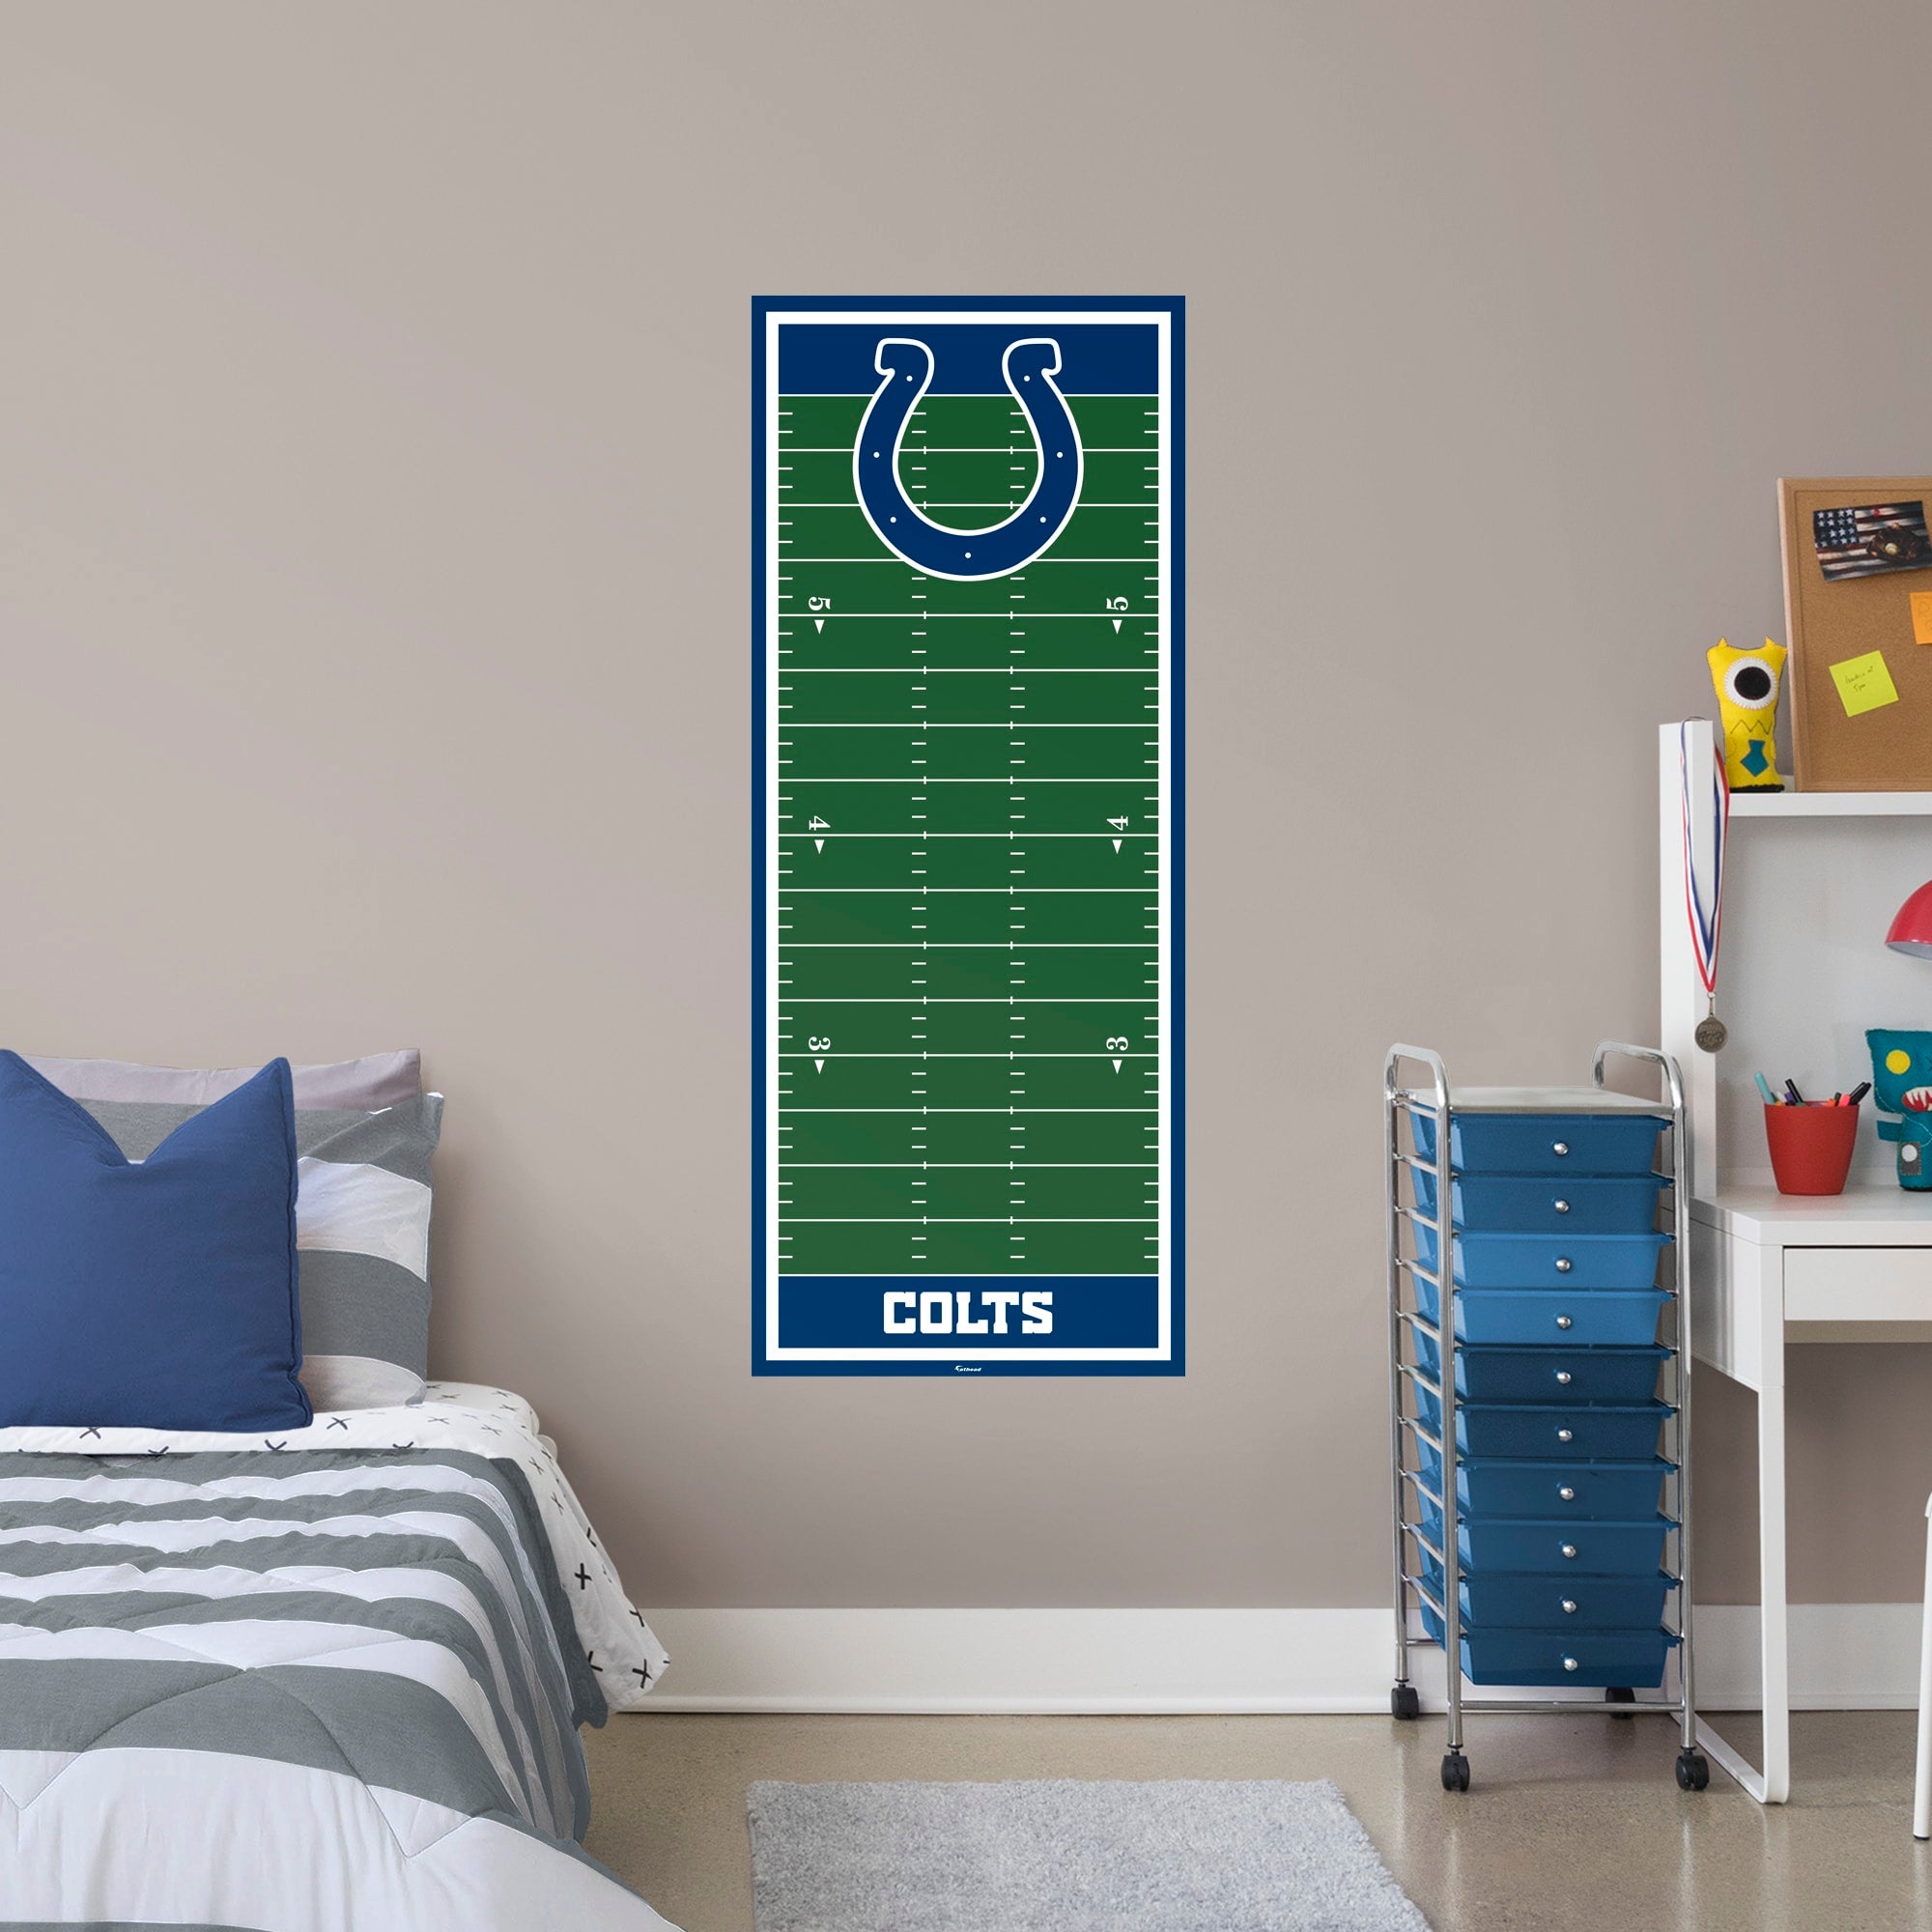 Indianapolis Colts: Growth Chart - Officially Licensed NFL Removable Wall Graphic by Fathead | Vinyl